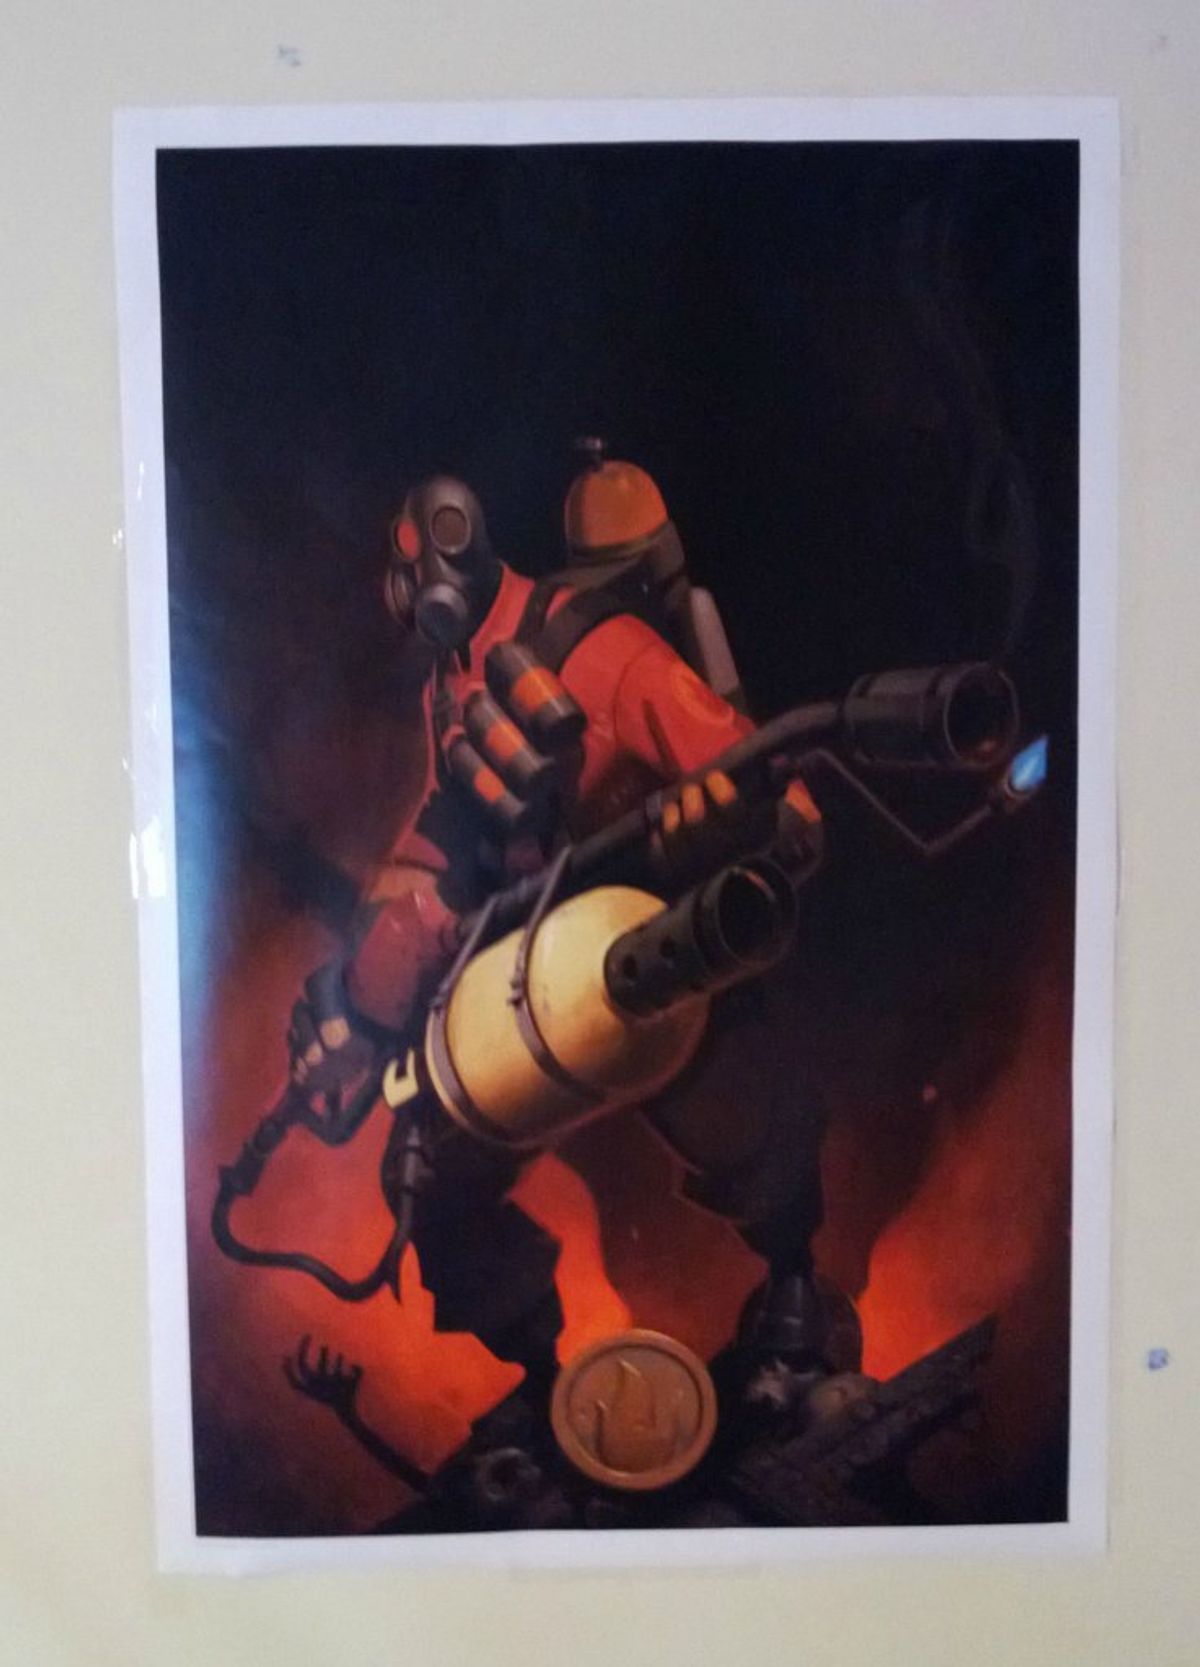 Pyro poster won by one of our donors.